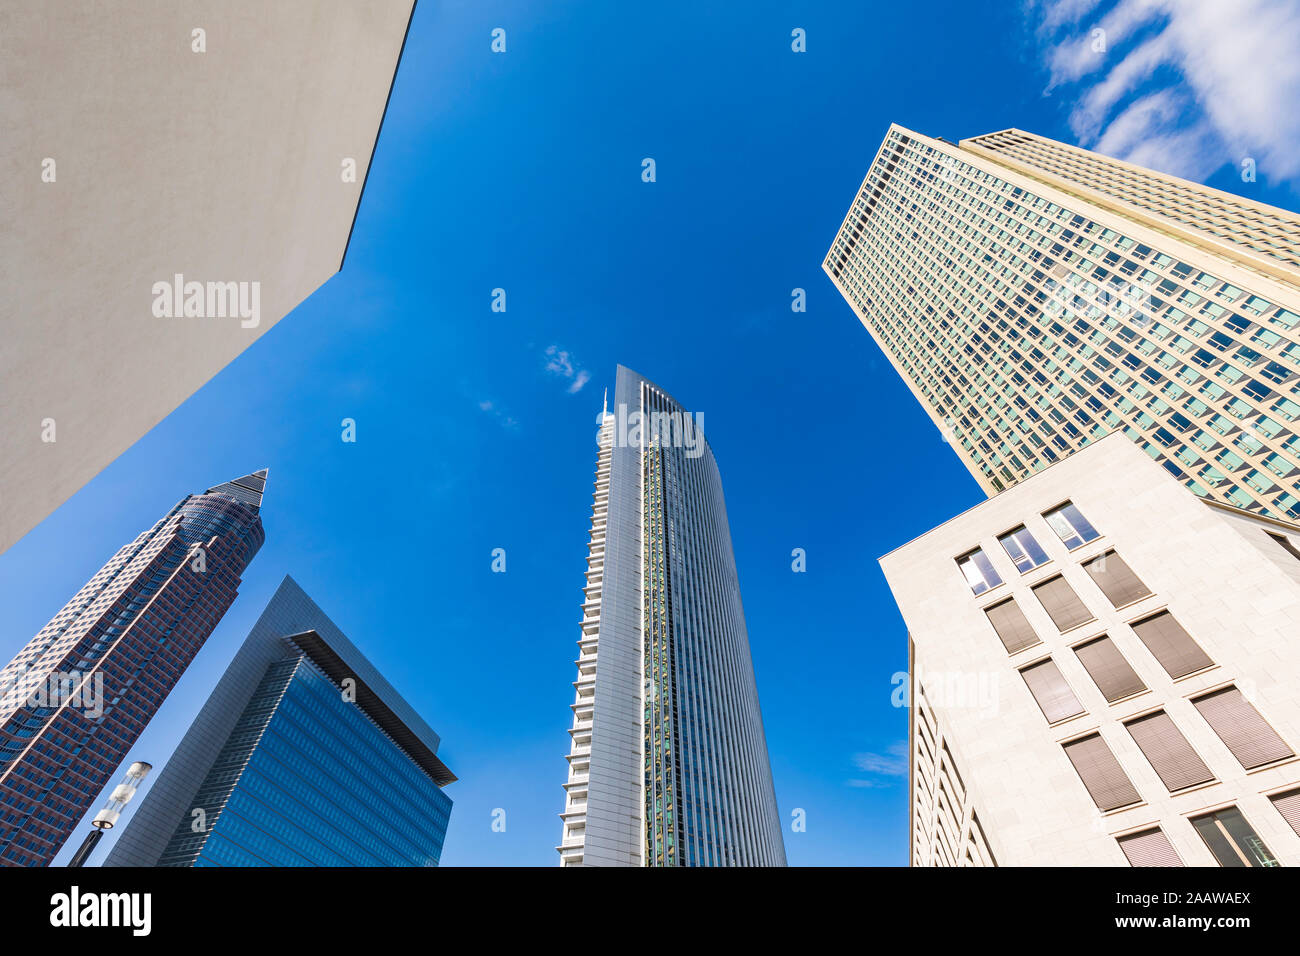 Low angle view of skyscrapers against blue sky, Frankfurt, Hesse, Germany Stock Photo